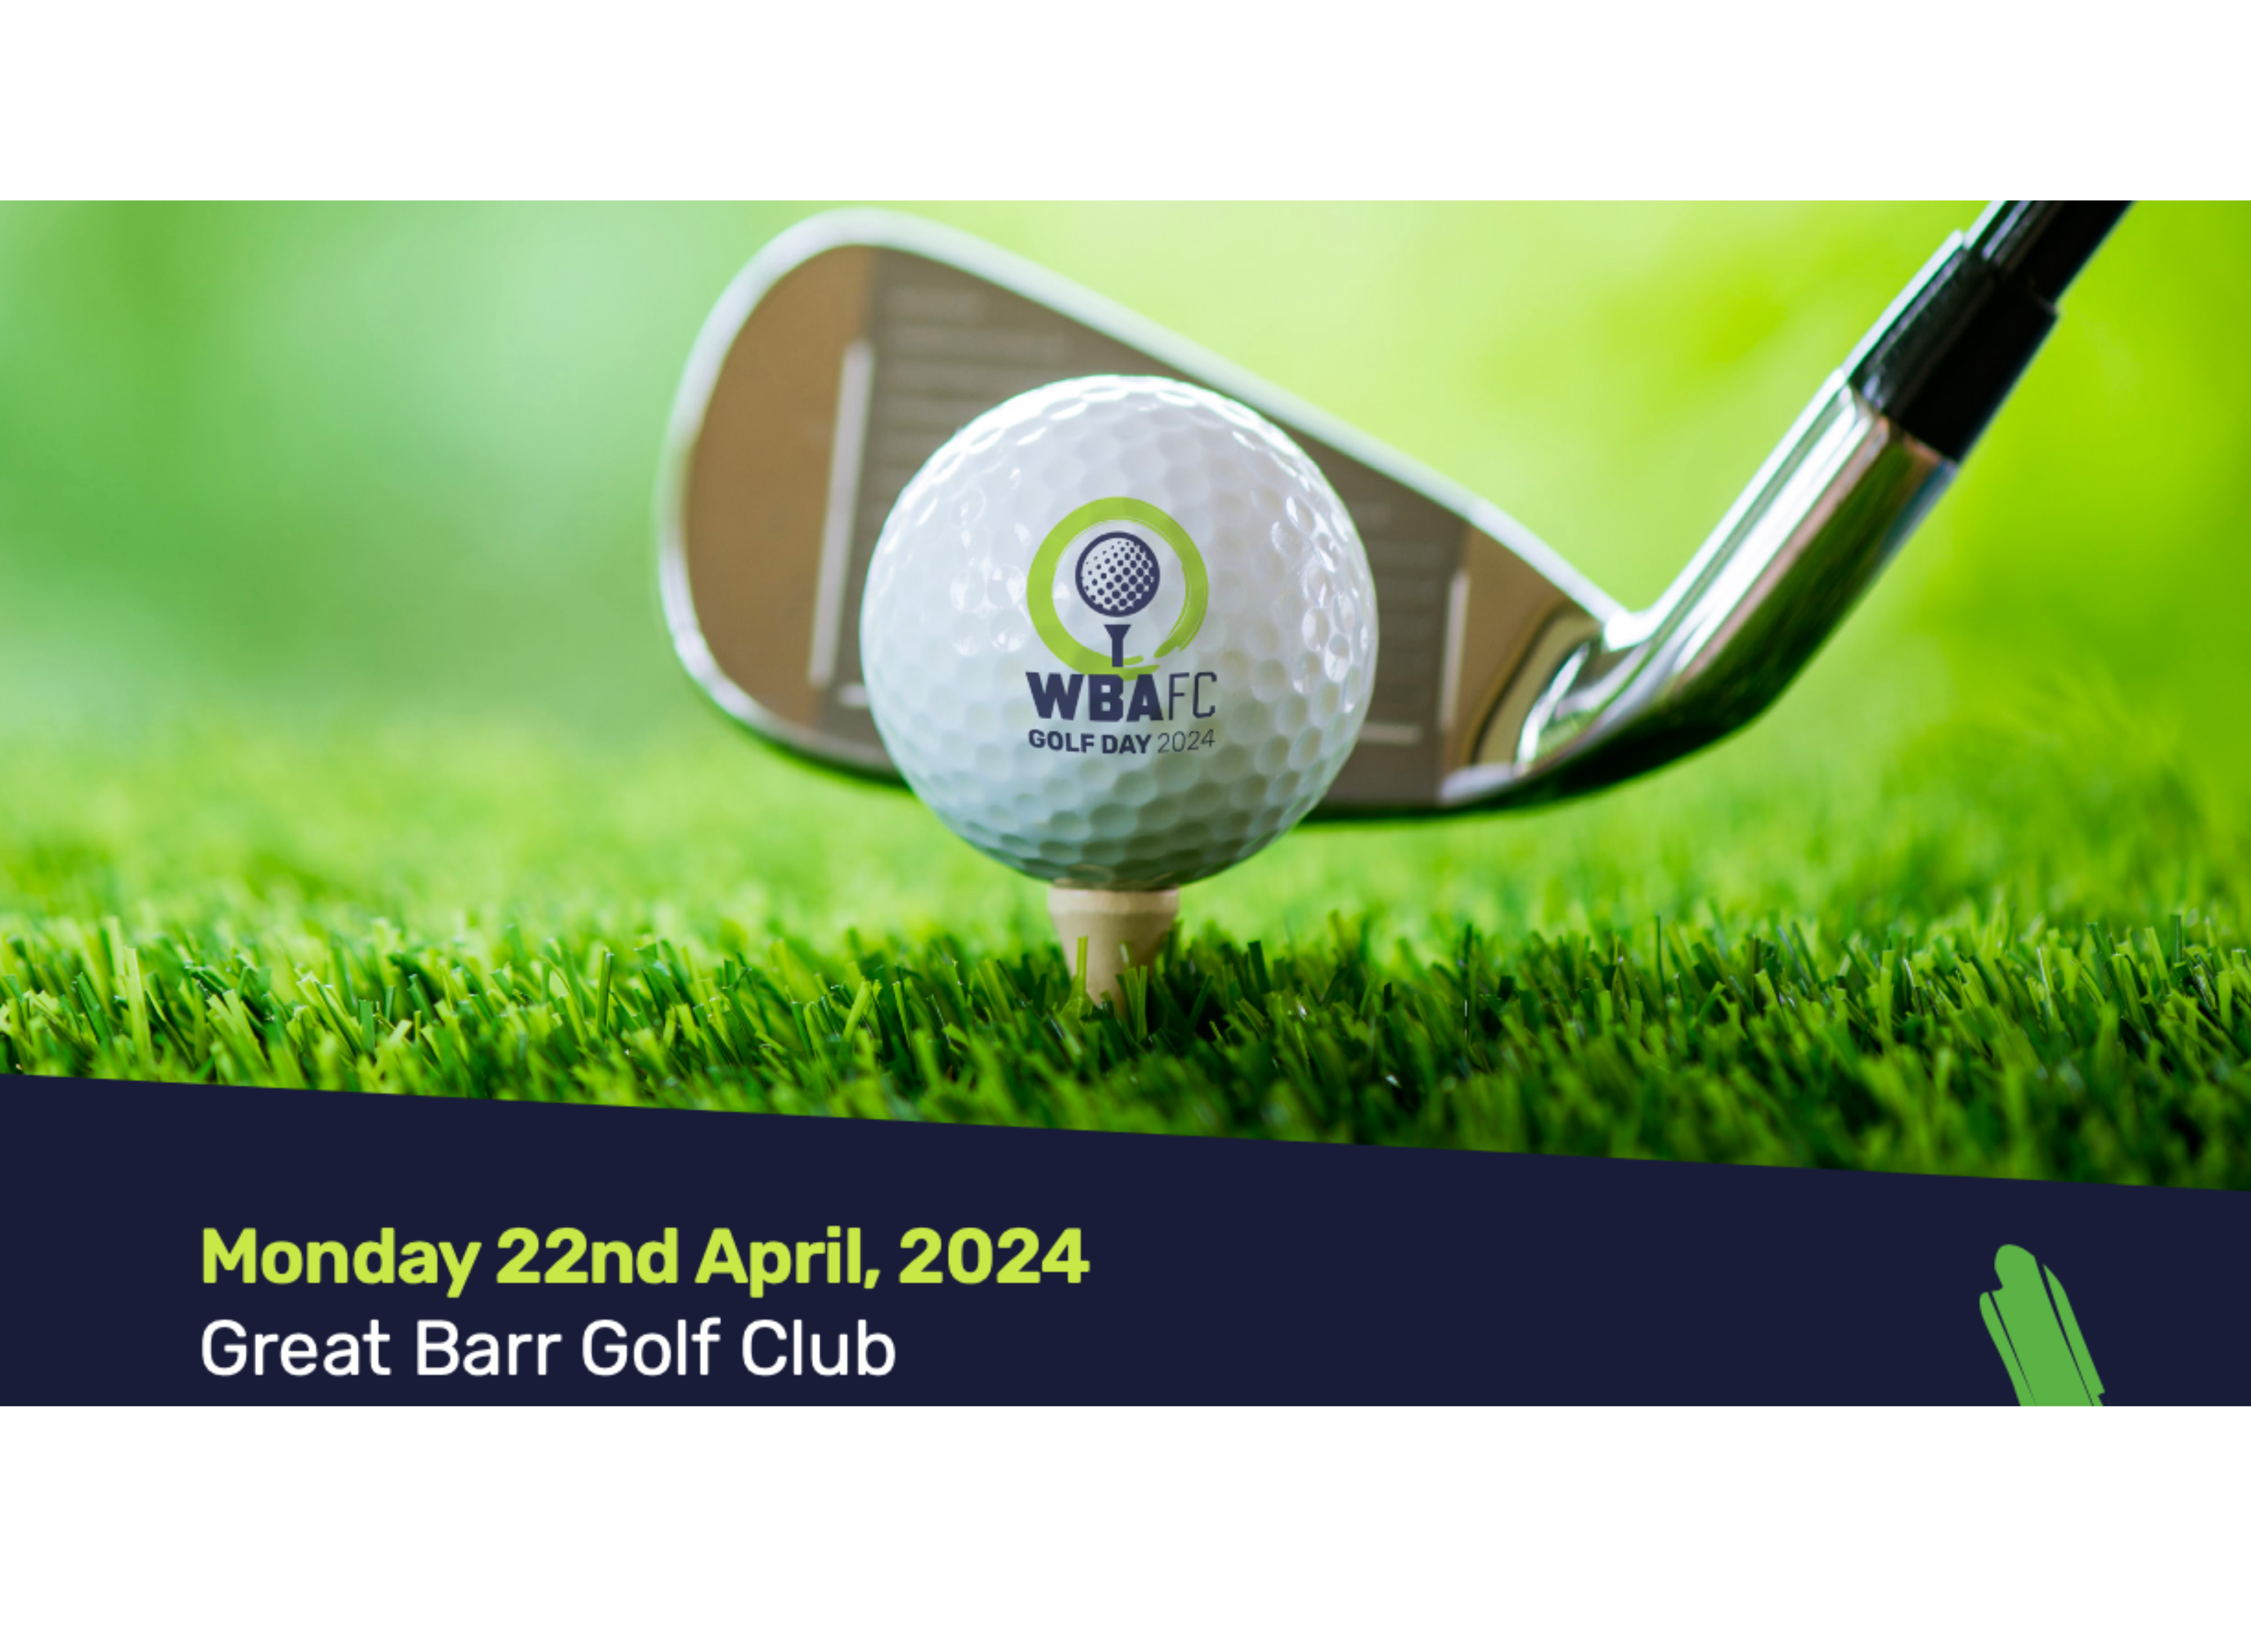 WBA Golf Day 2024 Promotion - Monday 22nd April 2024 at Great Barr Golf Club